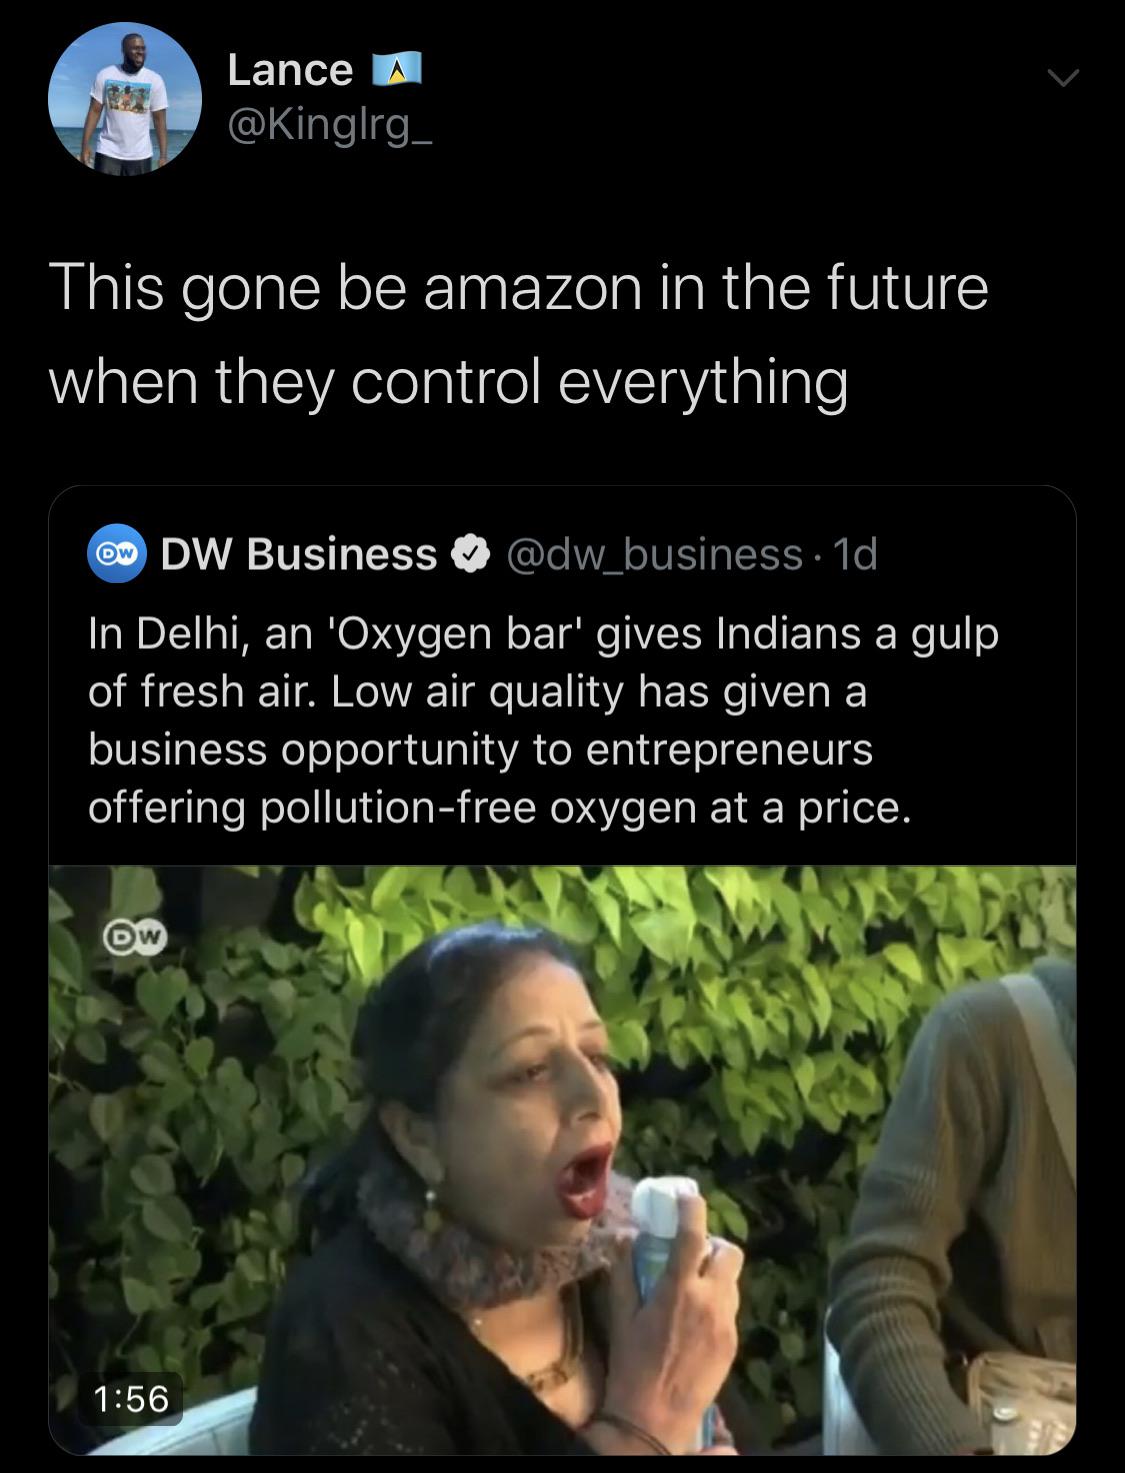 photo caption - Lance A This gone be amazon in the future when they control everything Ow Dw Business . 1d. In Delhi, an 'Oxygen bar' gives Indians a gulp of fresh air. Low air quality has given a business opportunity to entrepreneurs offering pollutionfr